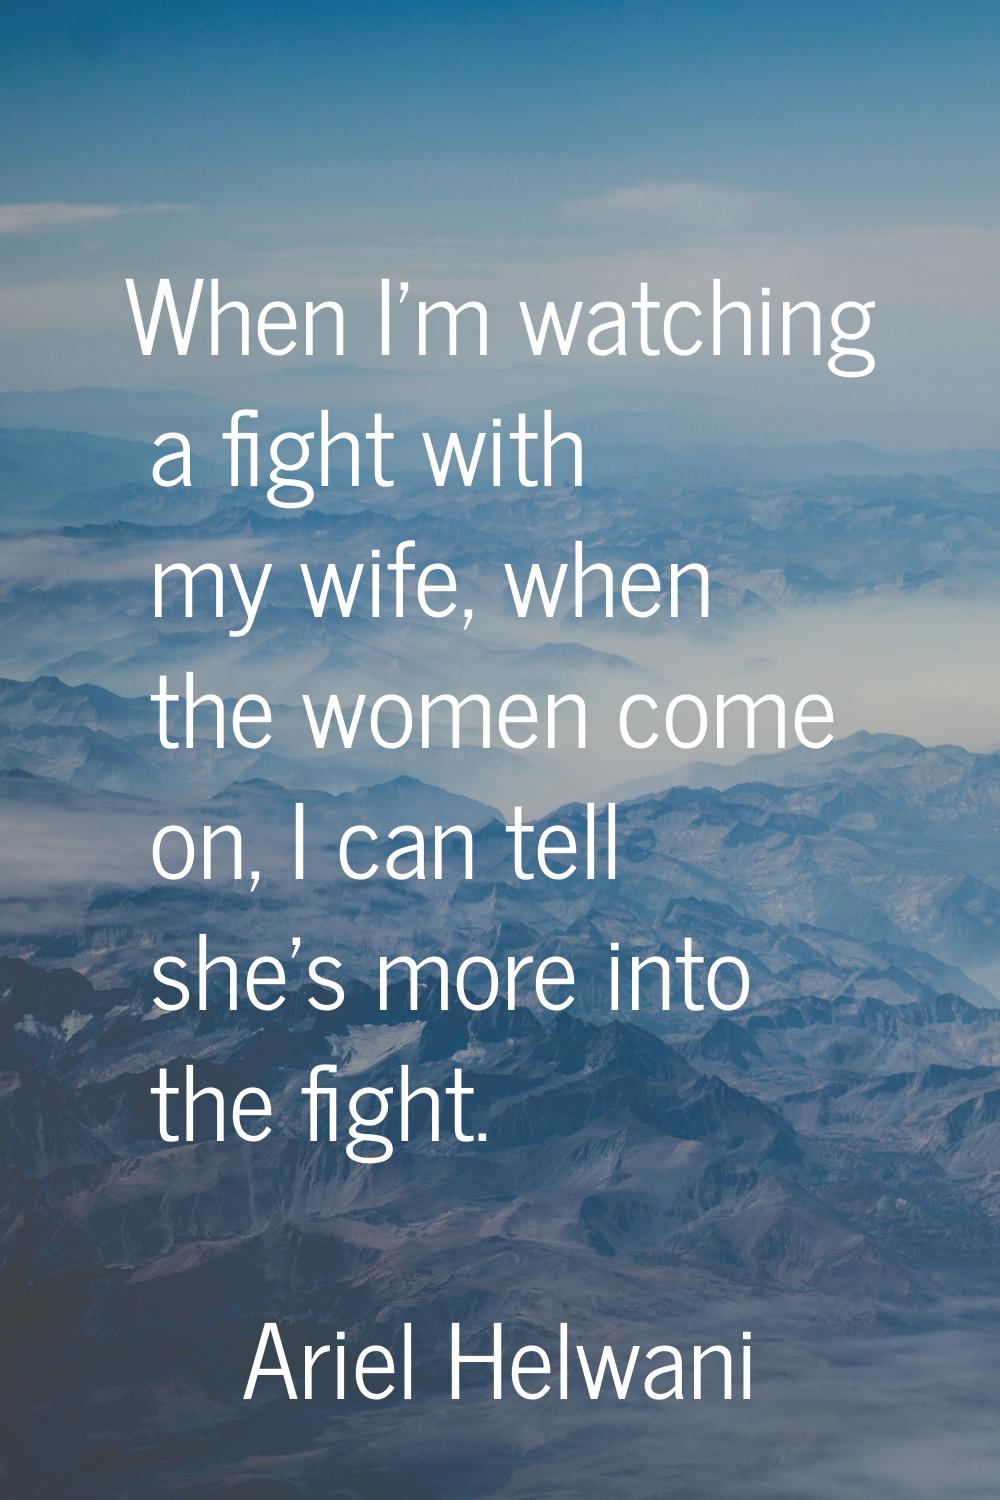 When I'm watching a fight with my wife, when the women come on, I can tell she's more into the figh